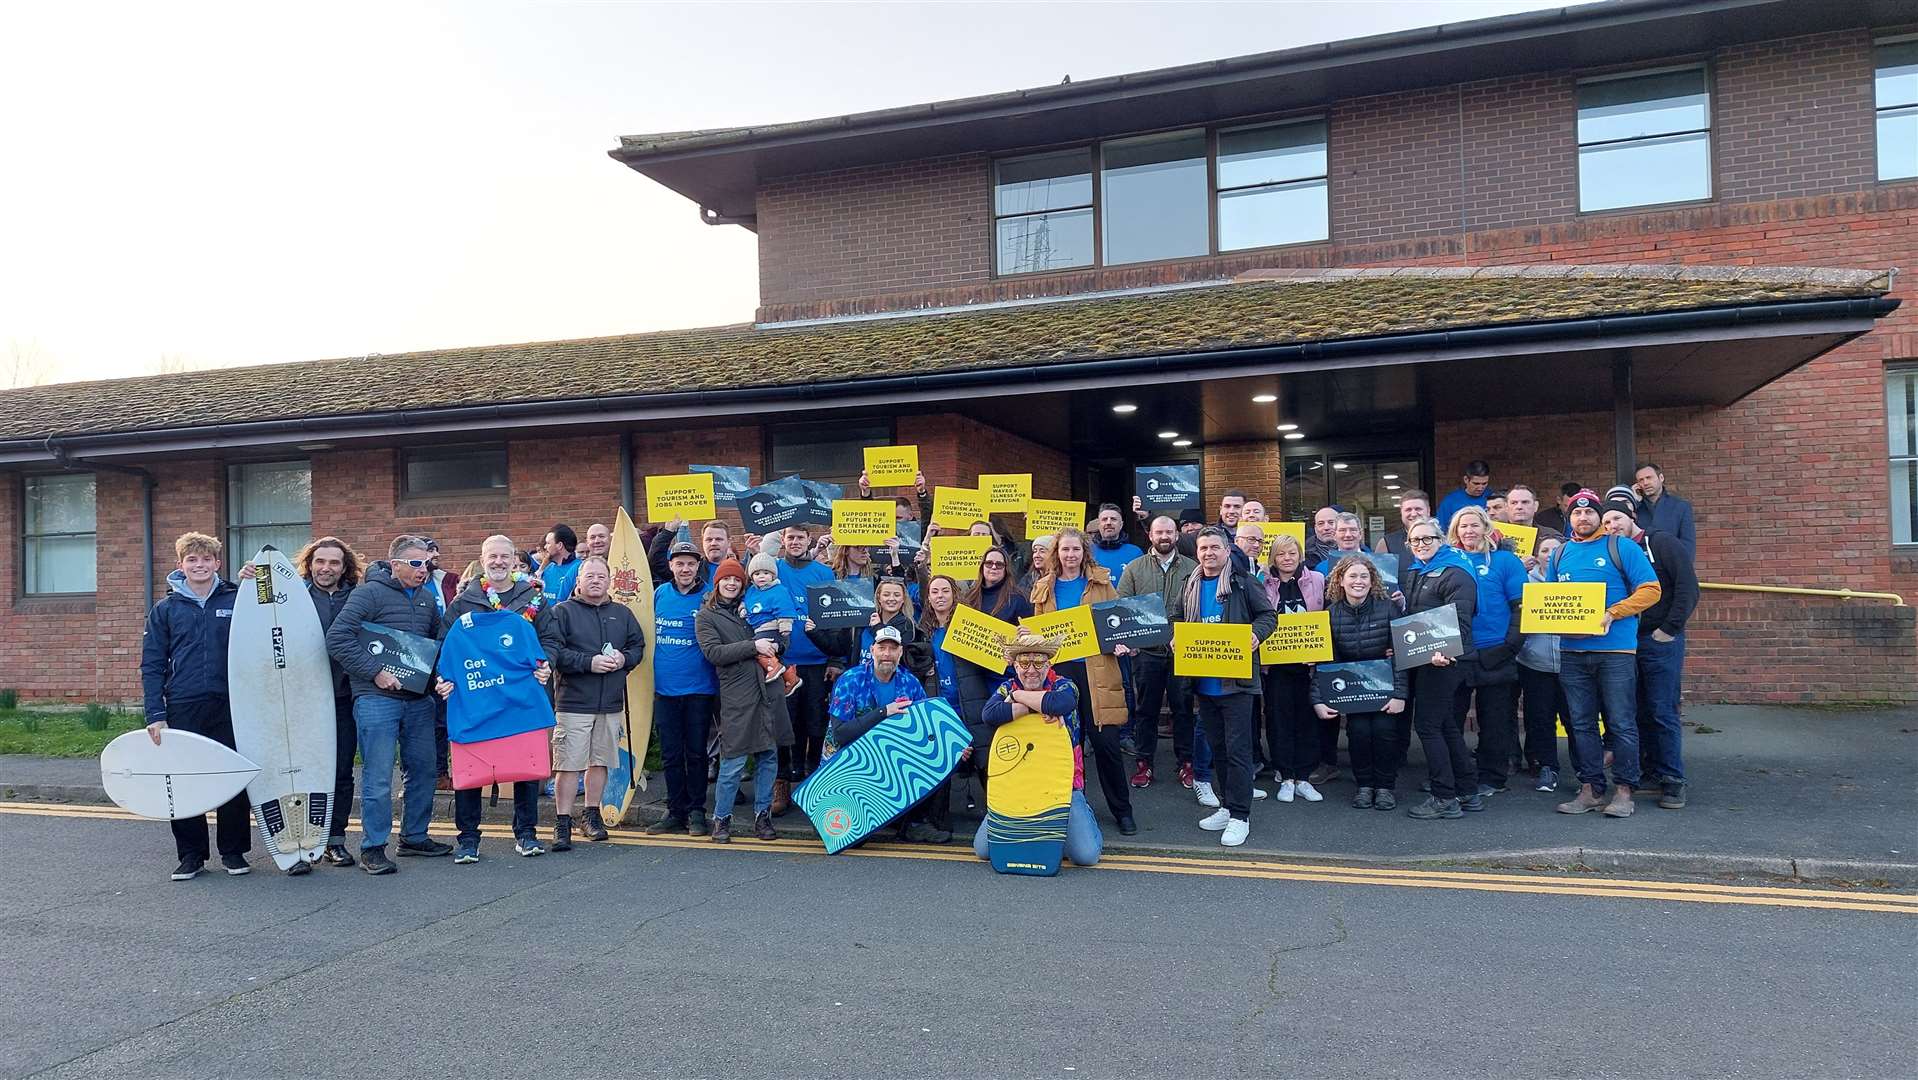 Those in favour of The Seahive surf lagoon and hotel gathered at the Dover District Council offices ahead of the meeting